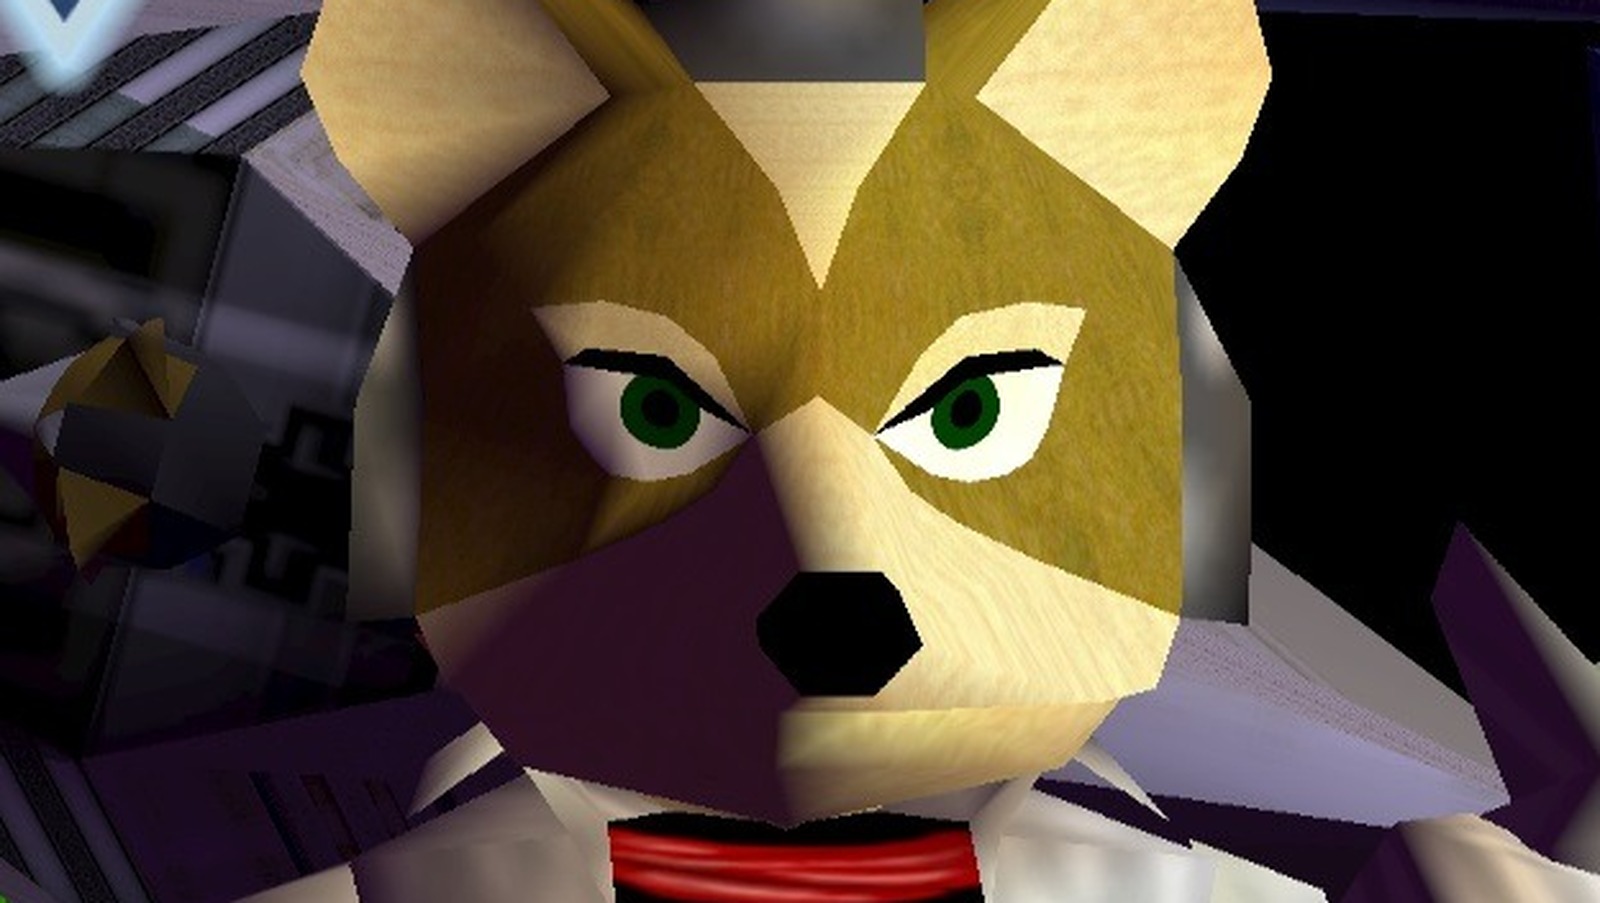 The Good And Bad Endings For Star Fox 64 Explained